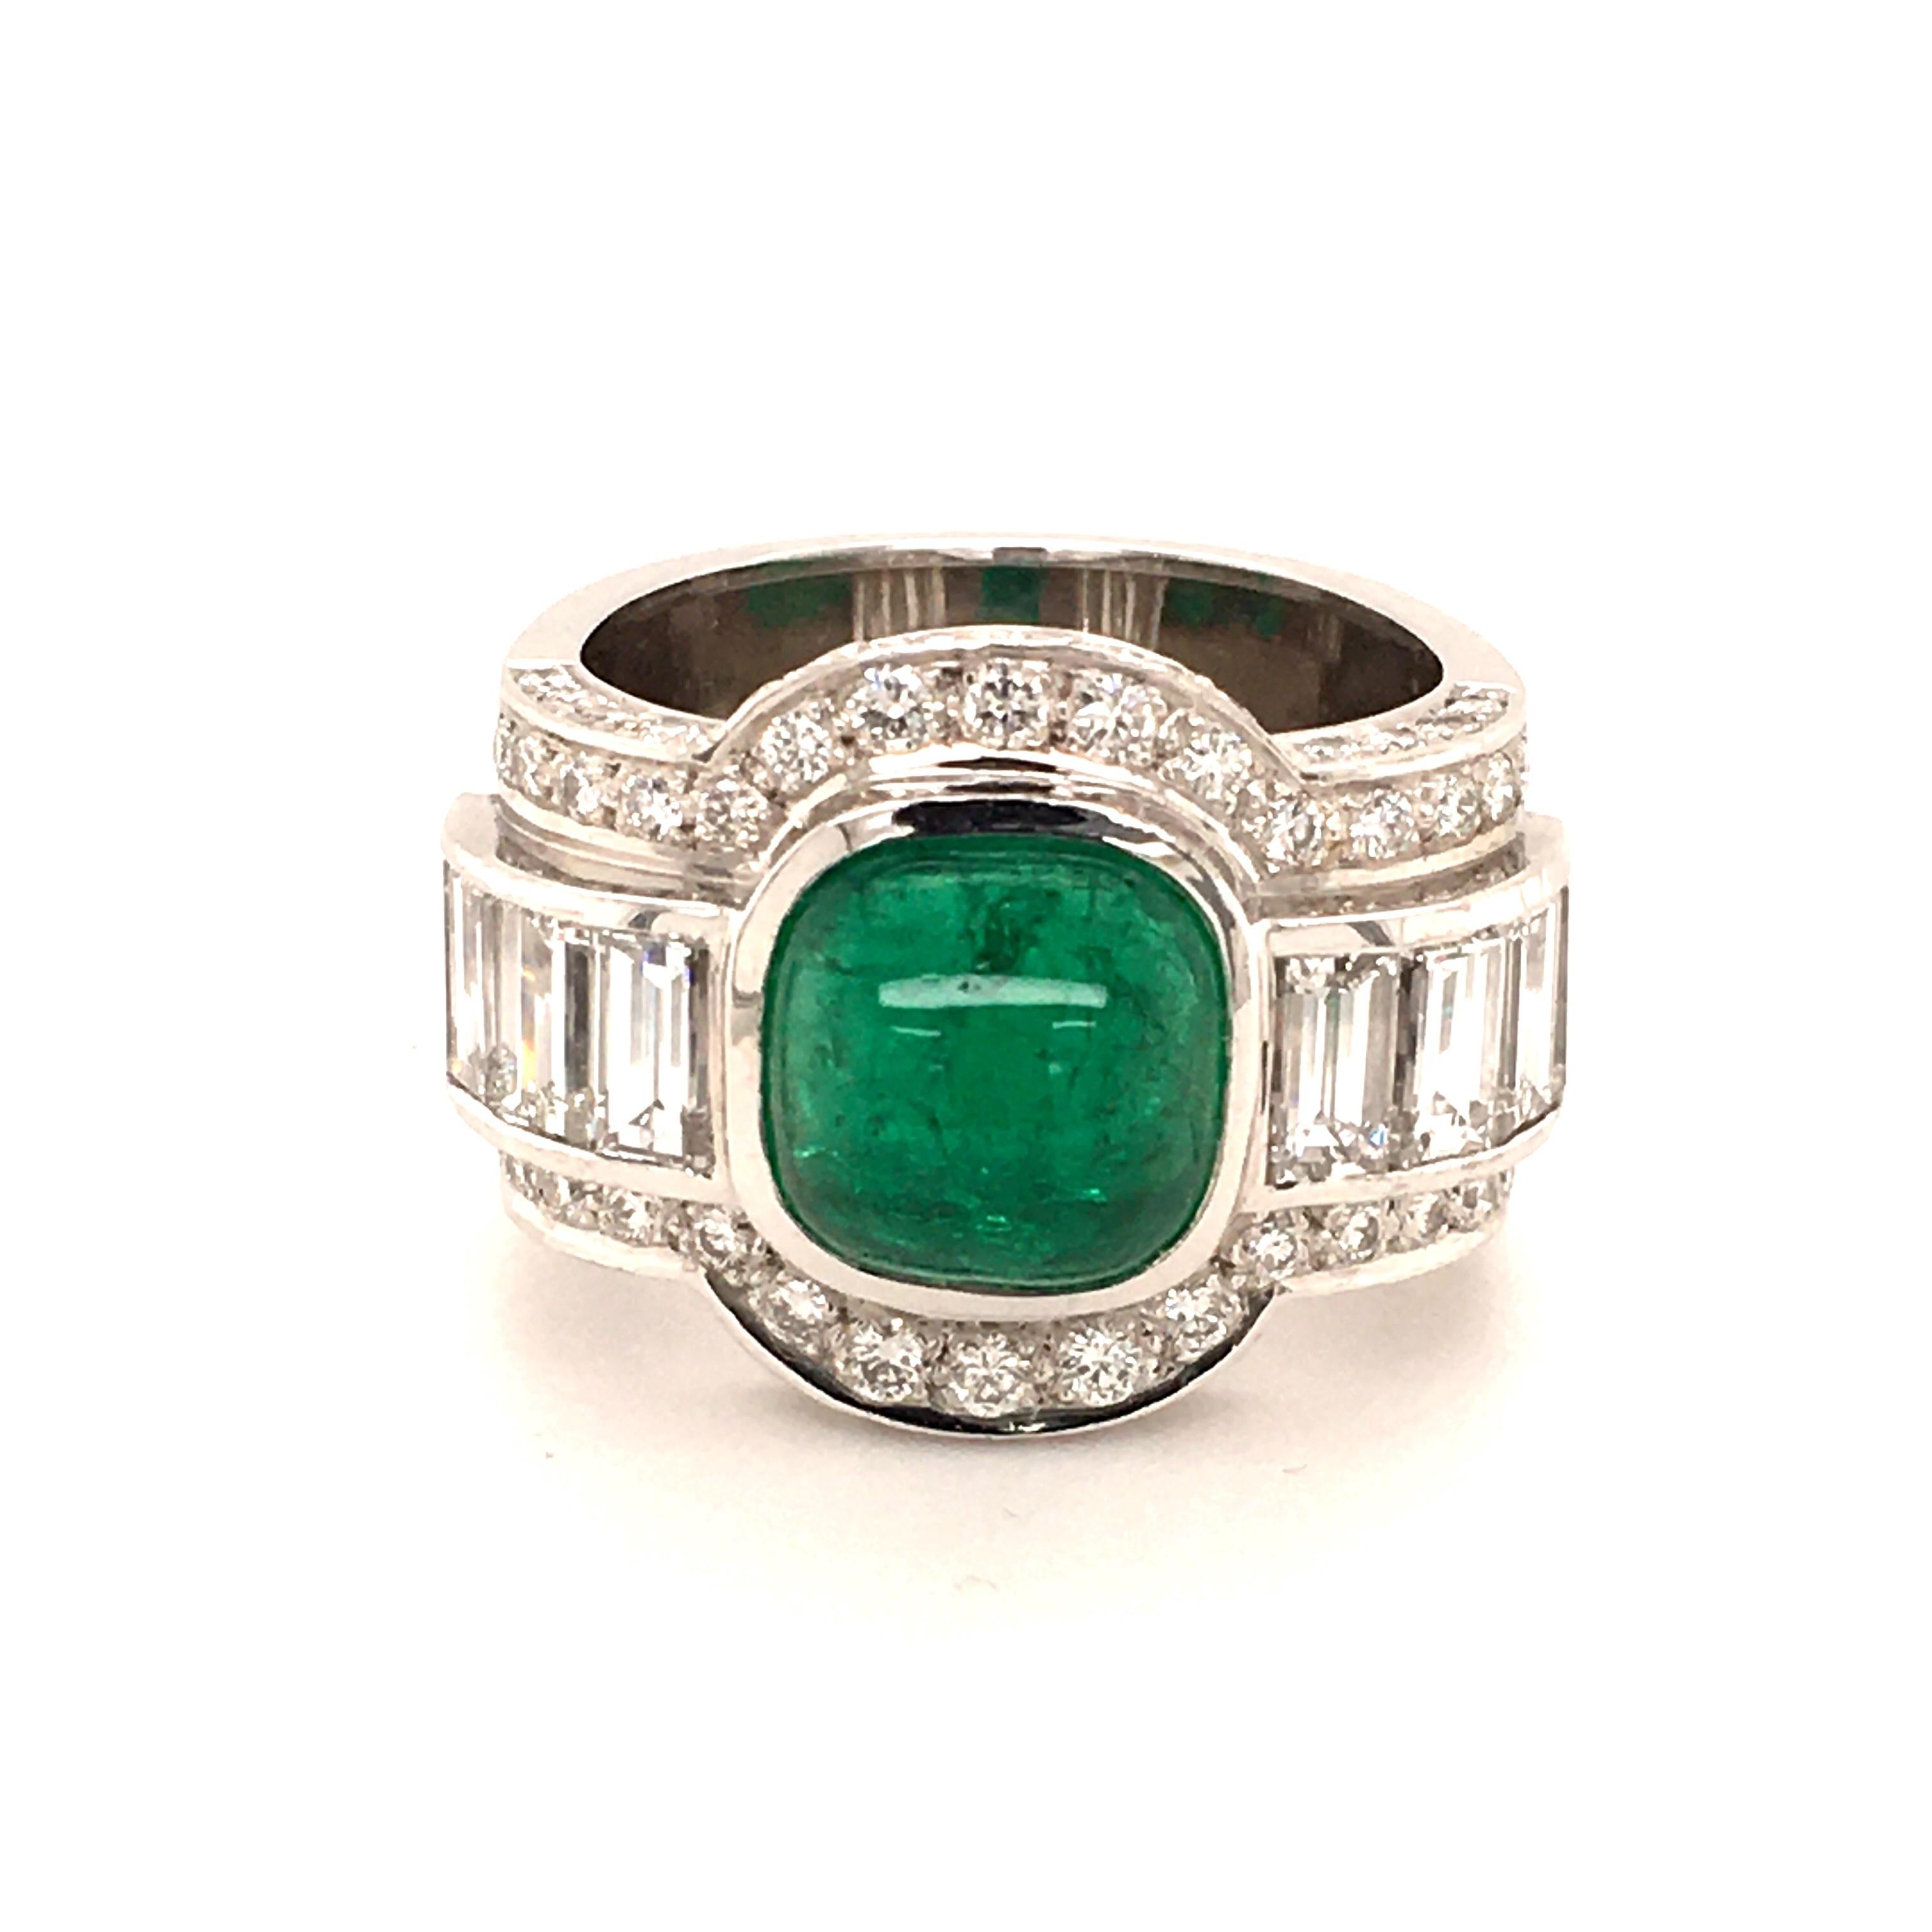 4.50 Carat Emerald and Diamond Ring in 18 Karat White Gold For Sale 1